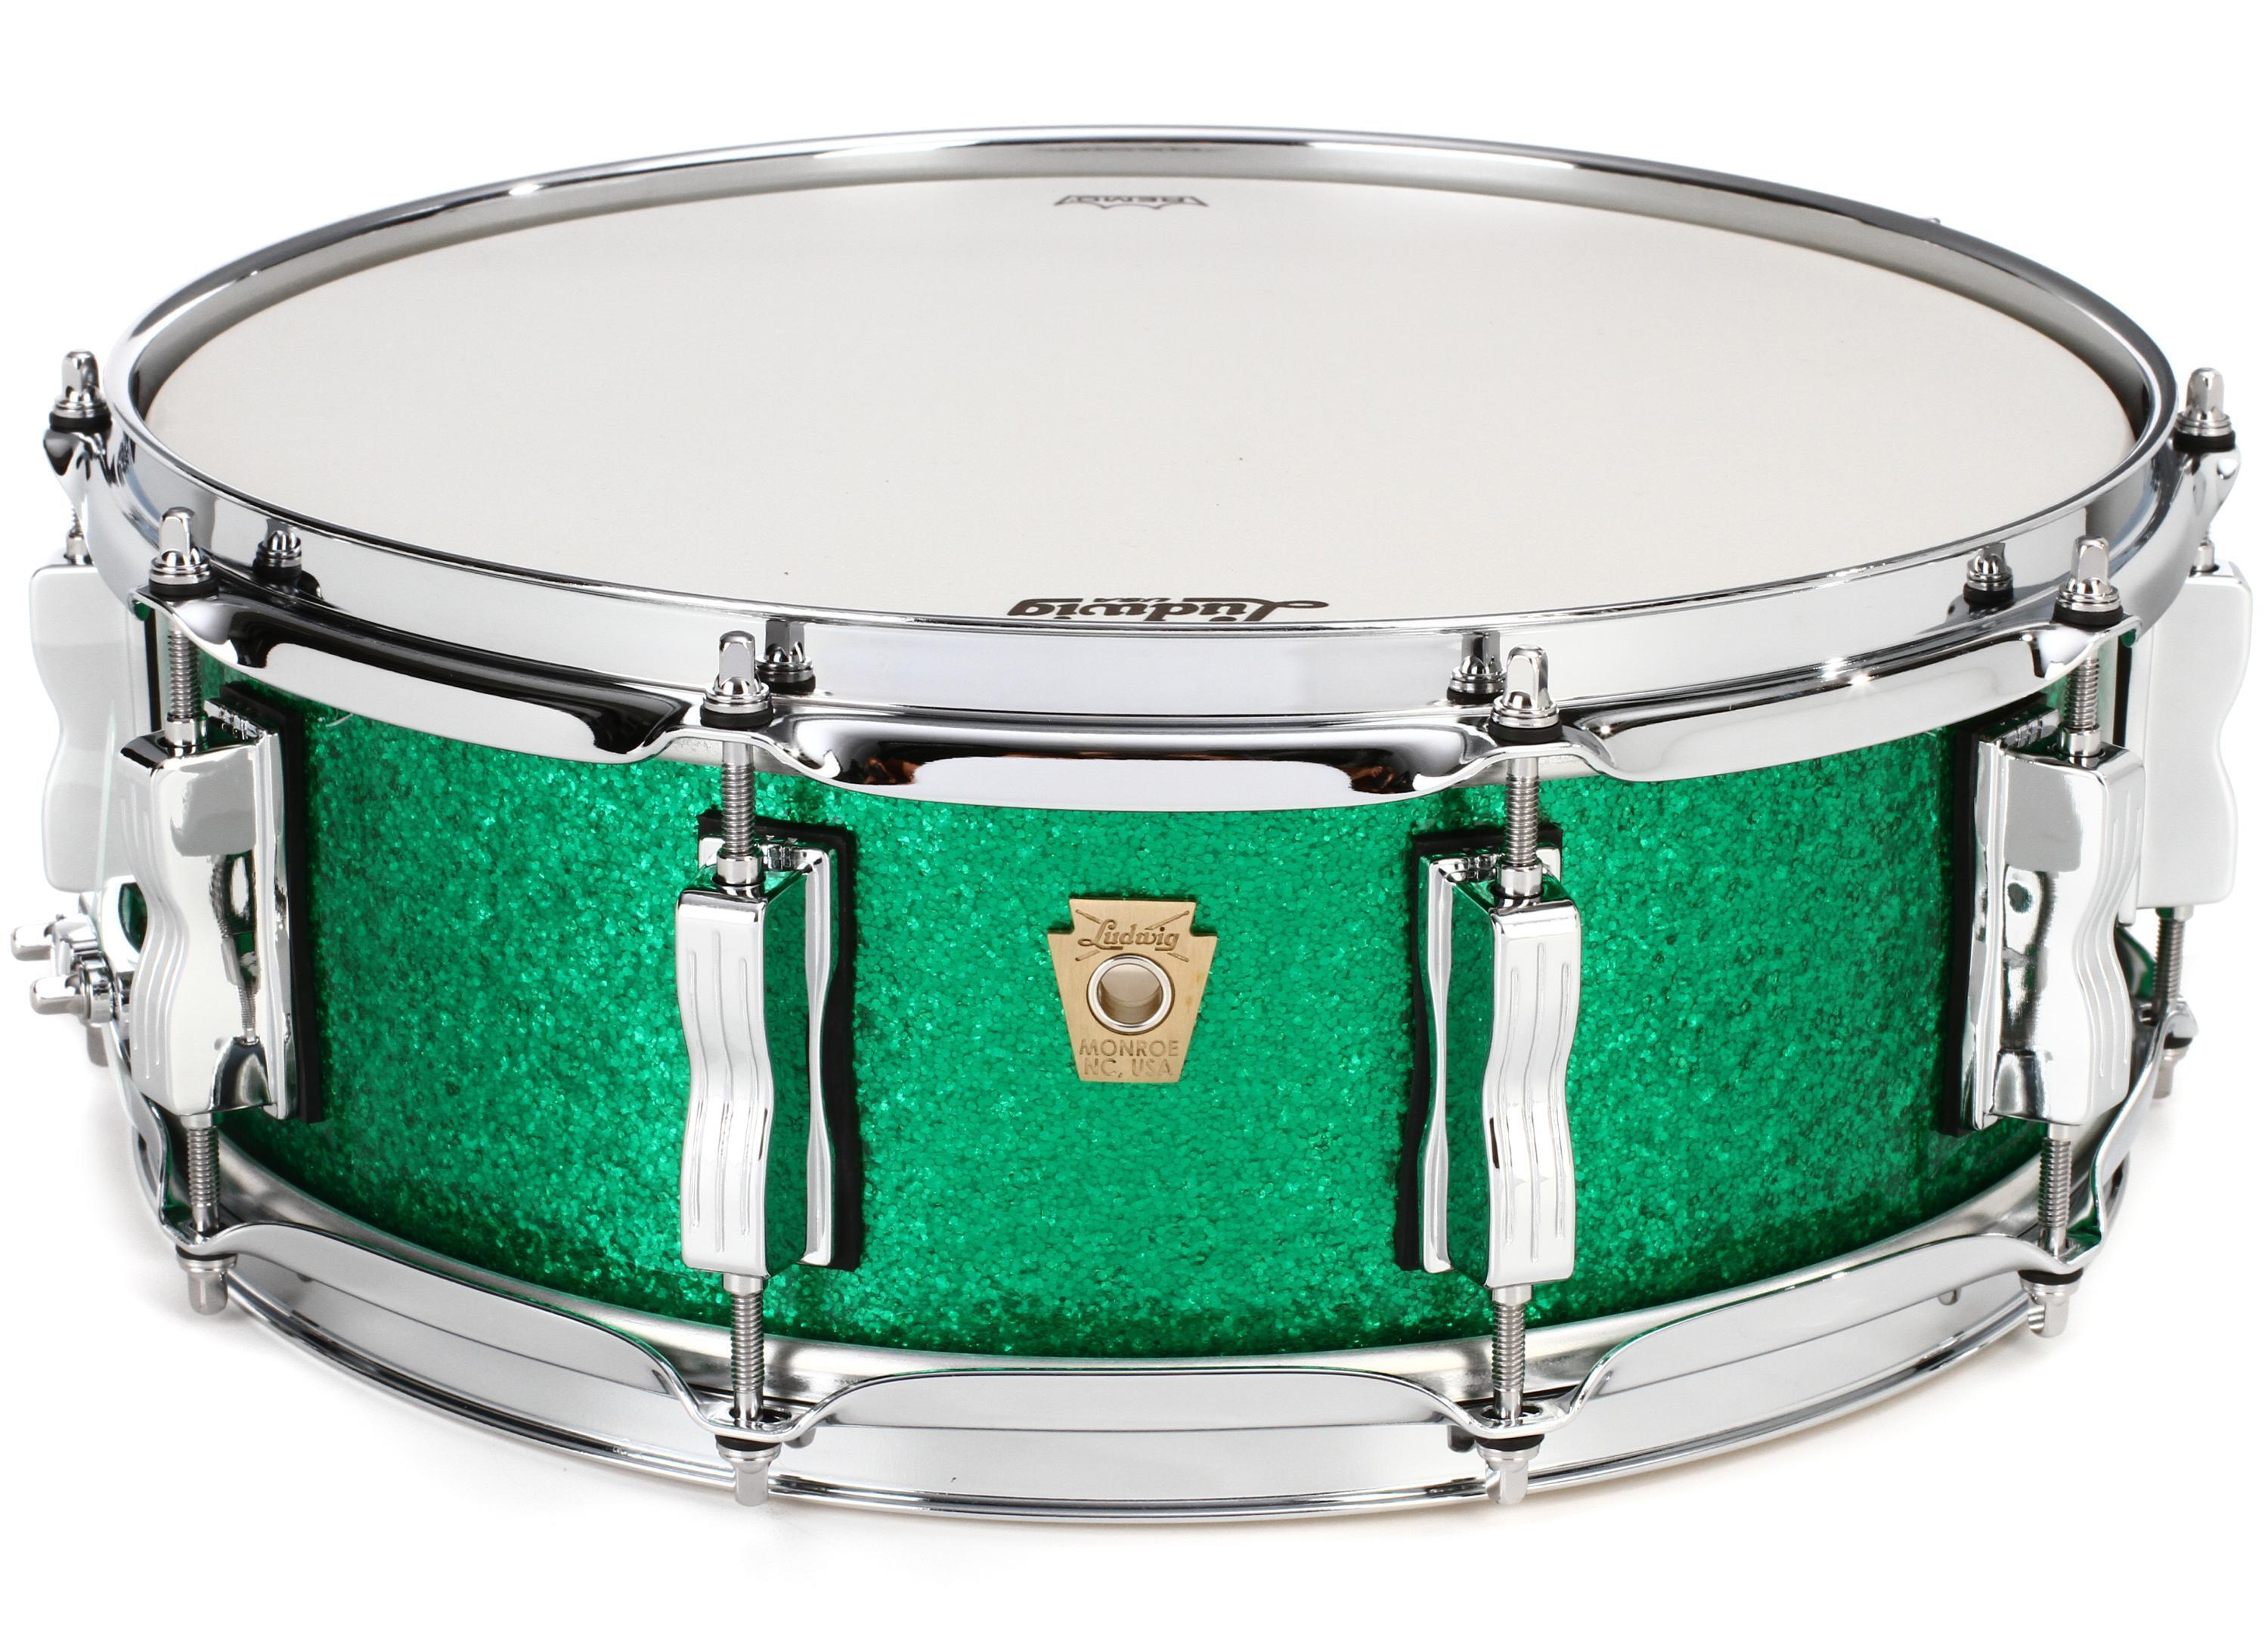 Ludwig Classic Maple Snare Drum - 5-inch x 14-inch - Green Sparkle